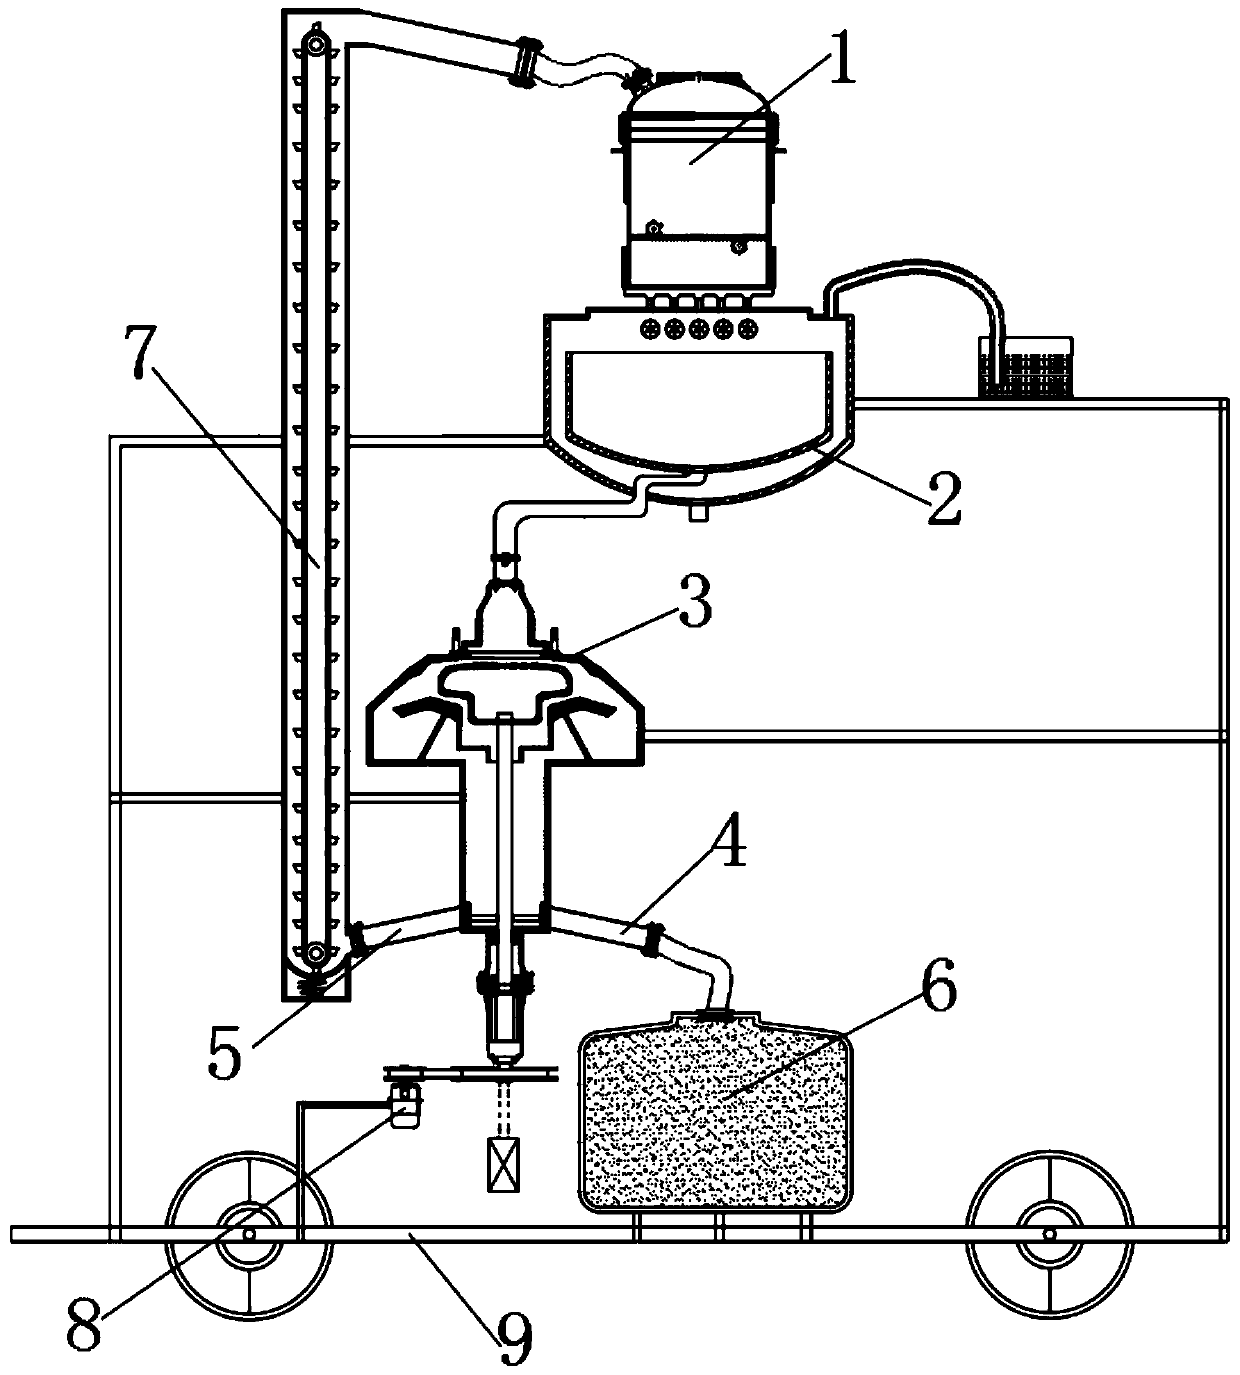 Grain screening and drying device